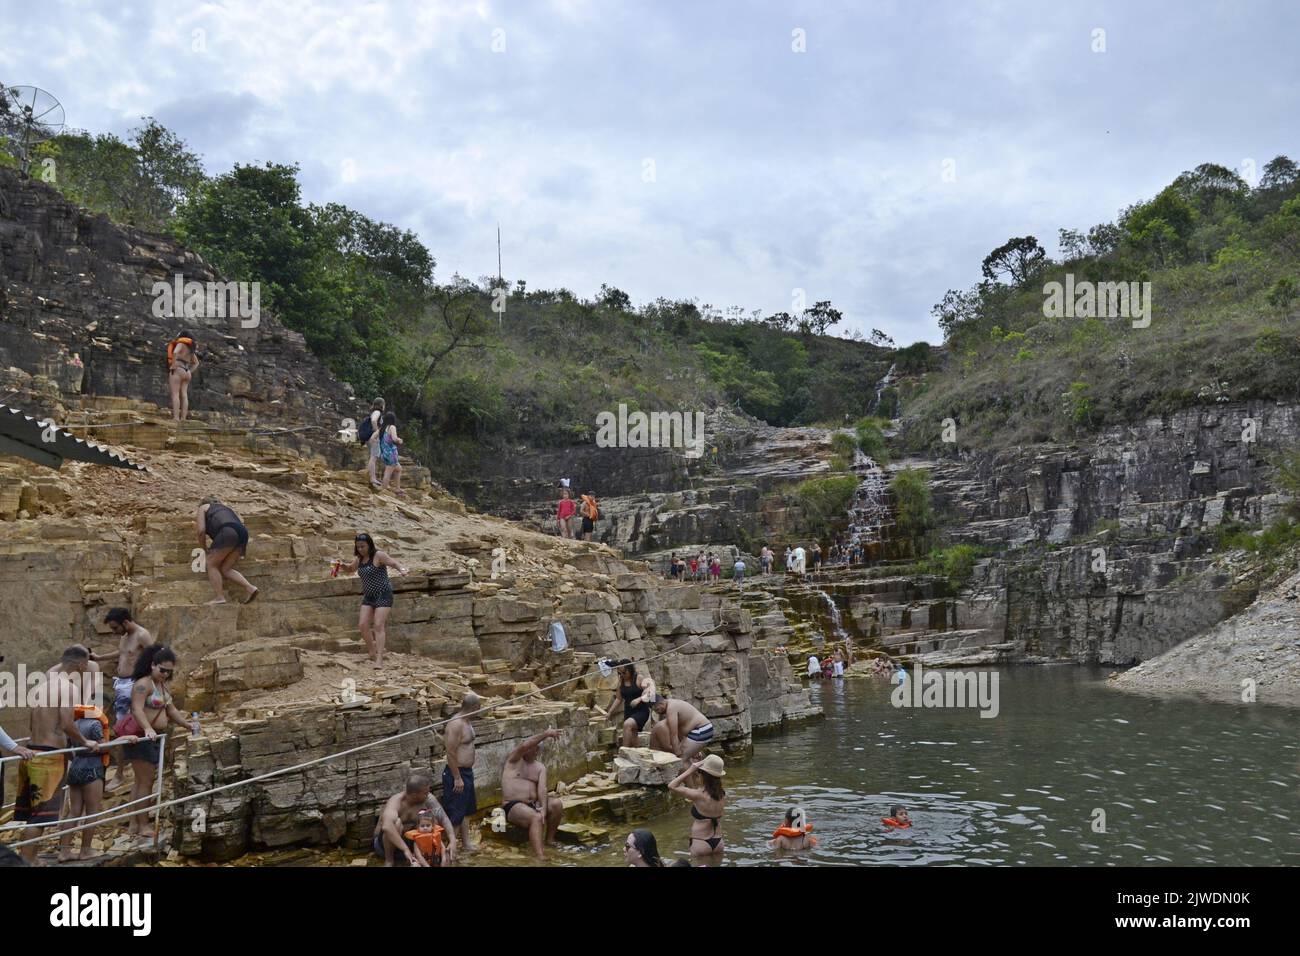 Tourists on the rocks and natural pool, Brazil, South America, panoramic view Stock Photo